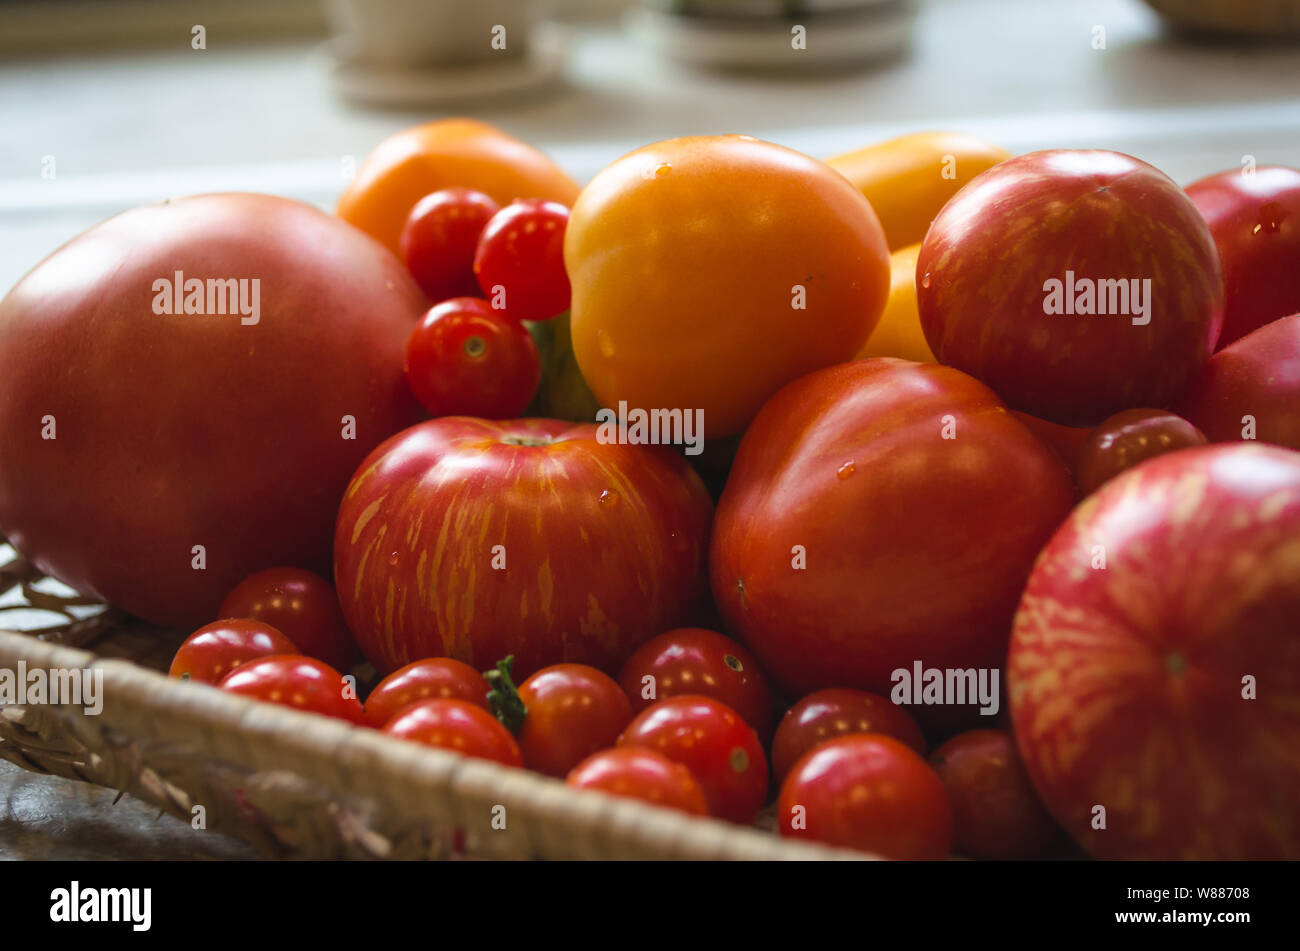 Close up of freshly picked from the garden tomatoes. Different types of tomatoes on one plate - cherry tomatoes, red, orange tomatoes. Stock Photo